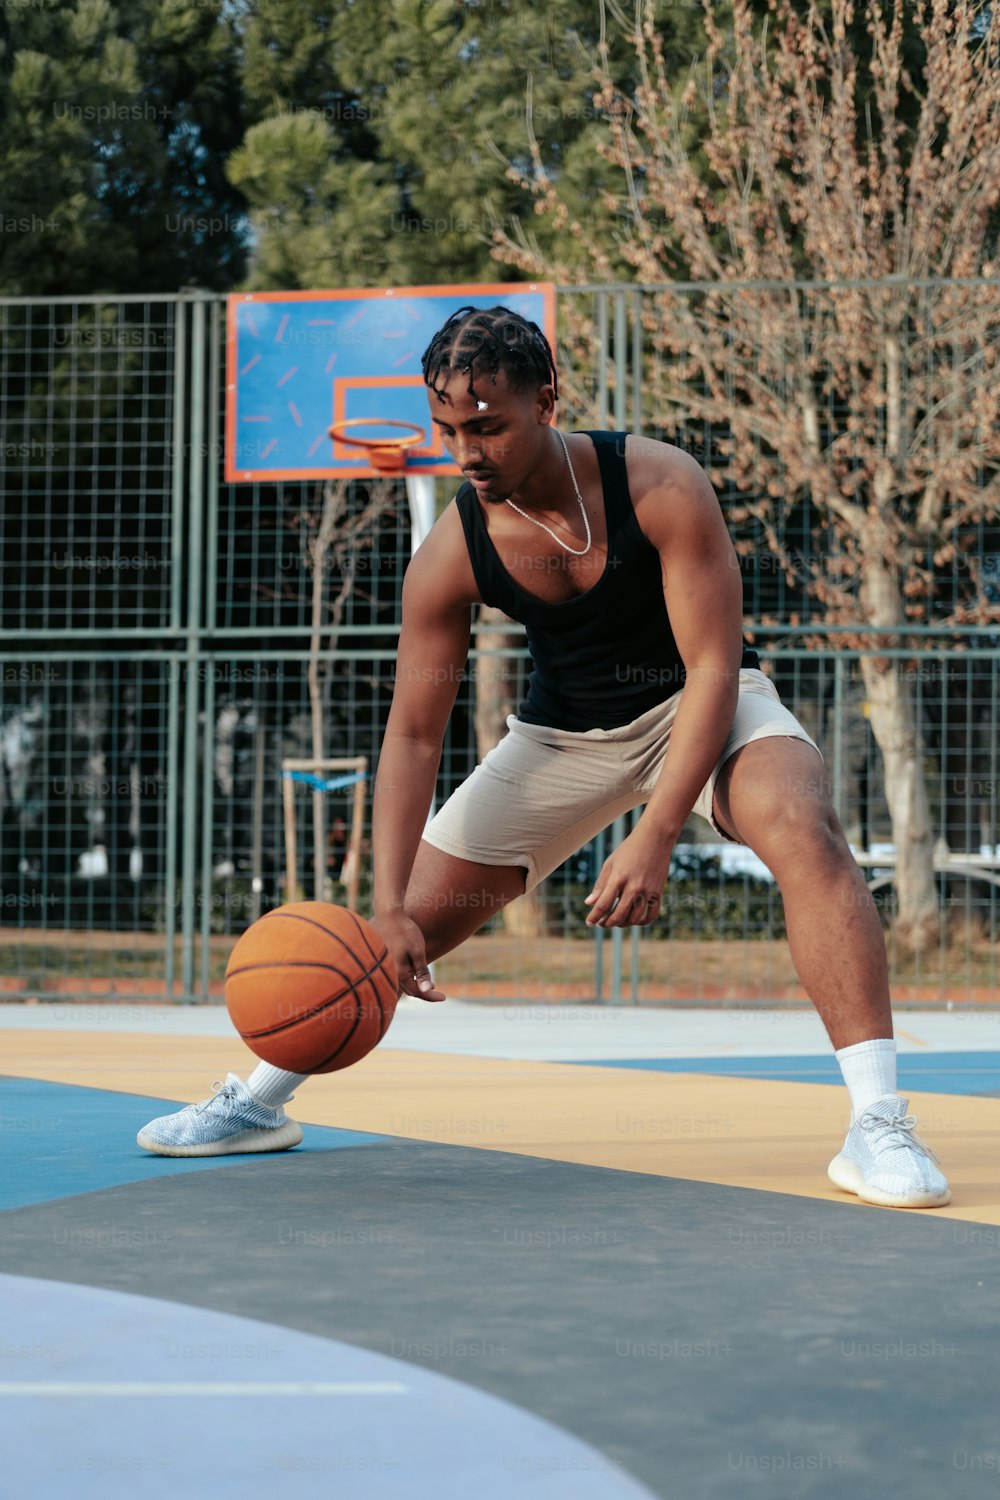 a man is playing basketball on a court